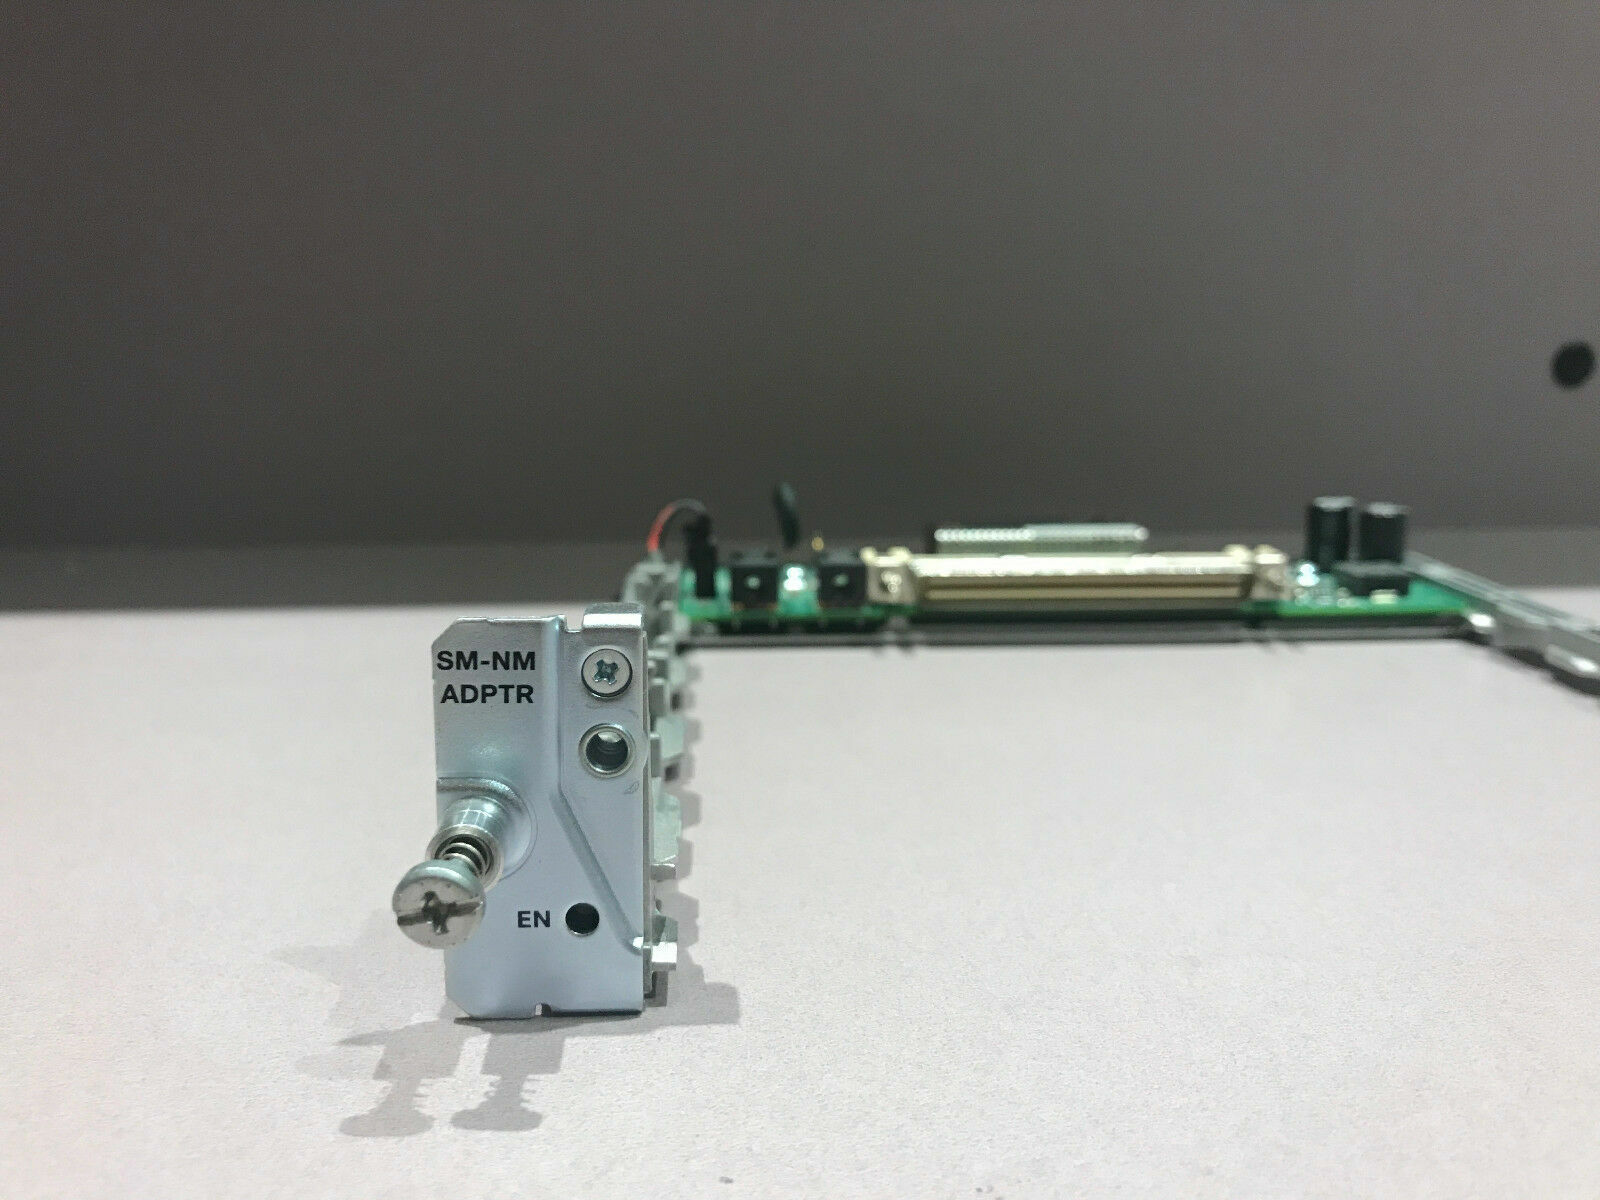 Cisco SM-NM-ADPTR Network Module Adapter for 2900 & 3900 Routers